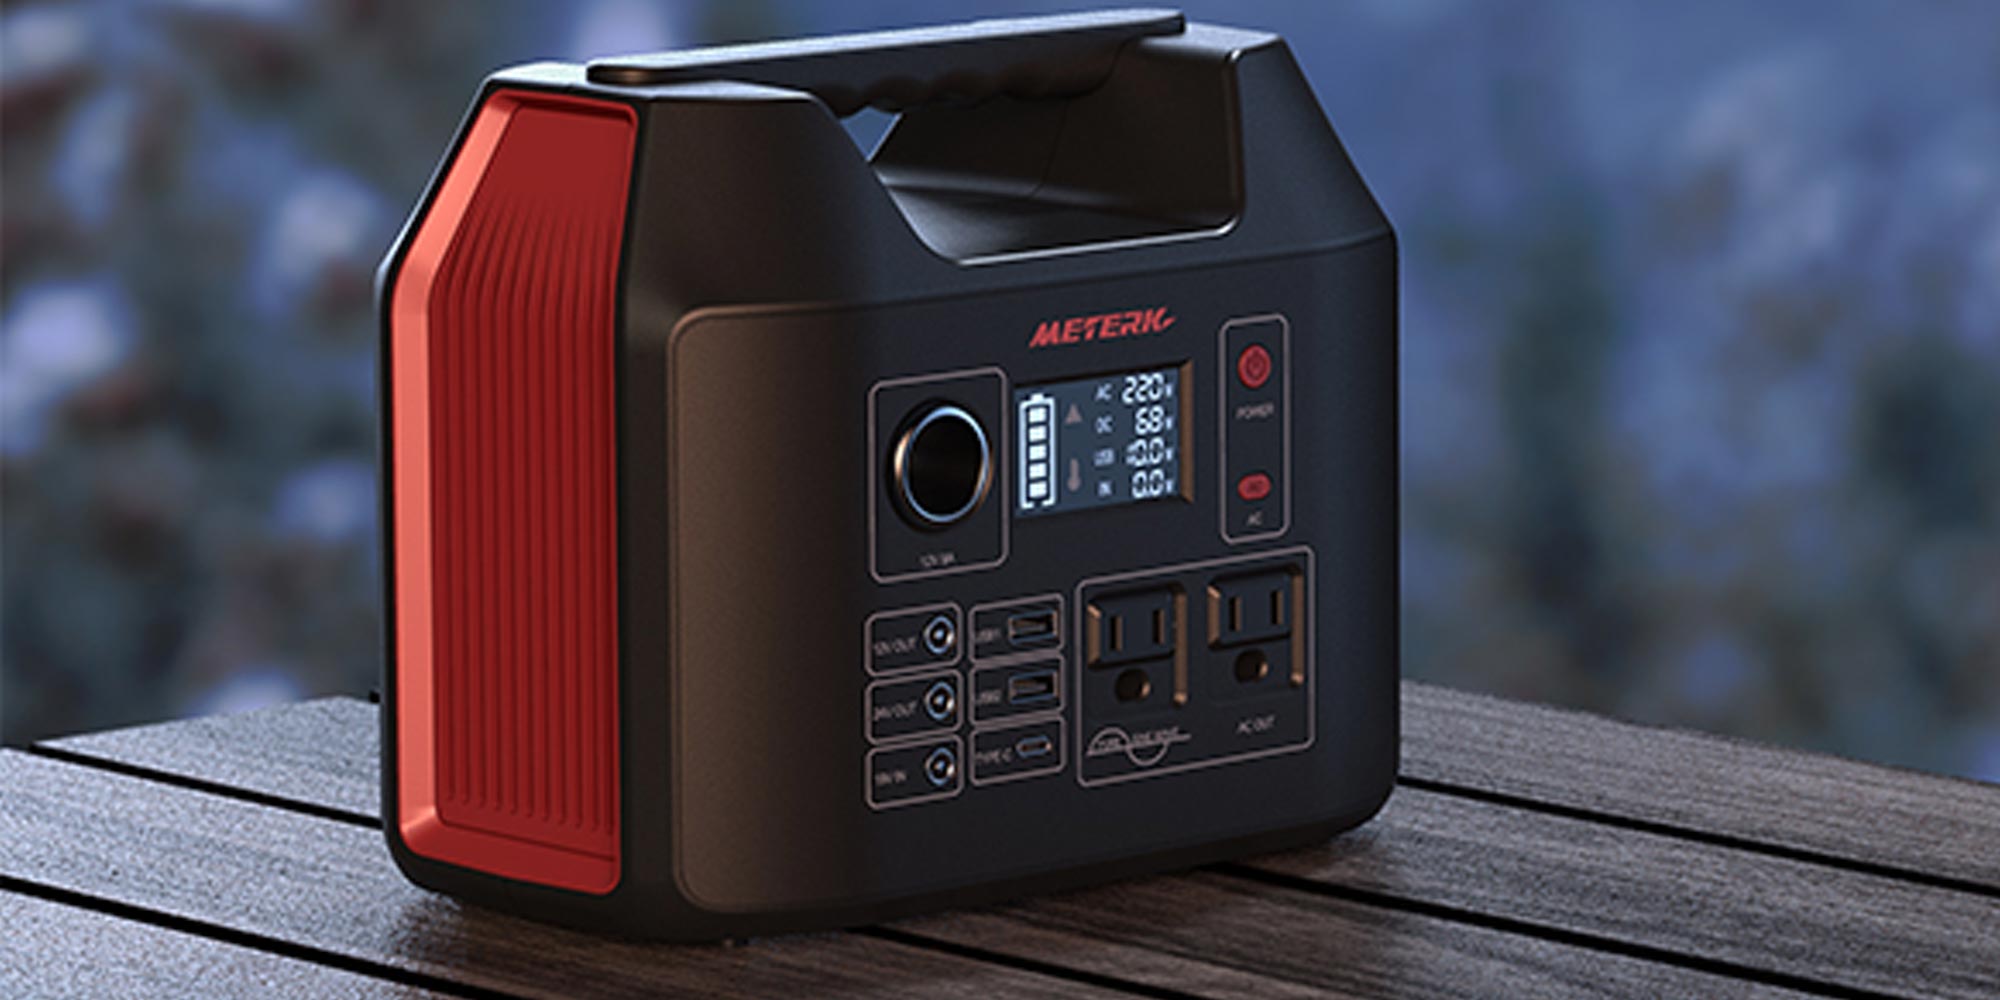 This portable power station offers 18W USB-C, multiple AC plugs, + more